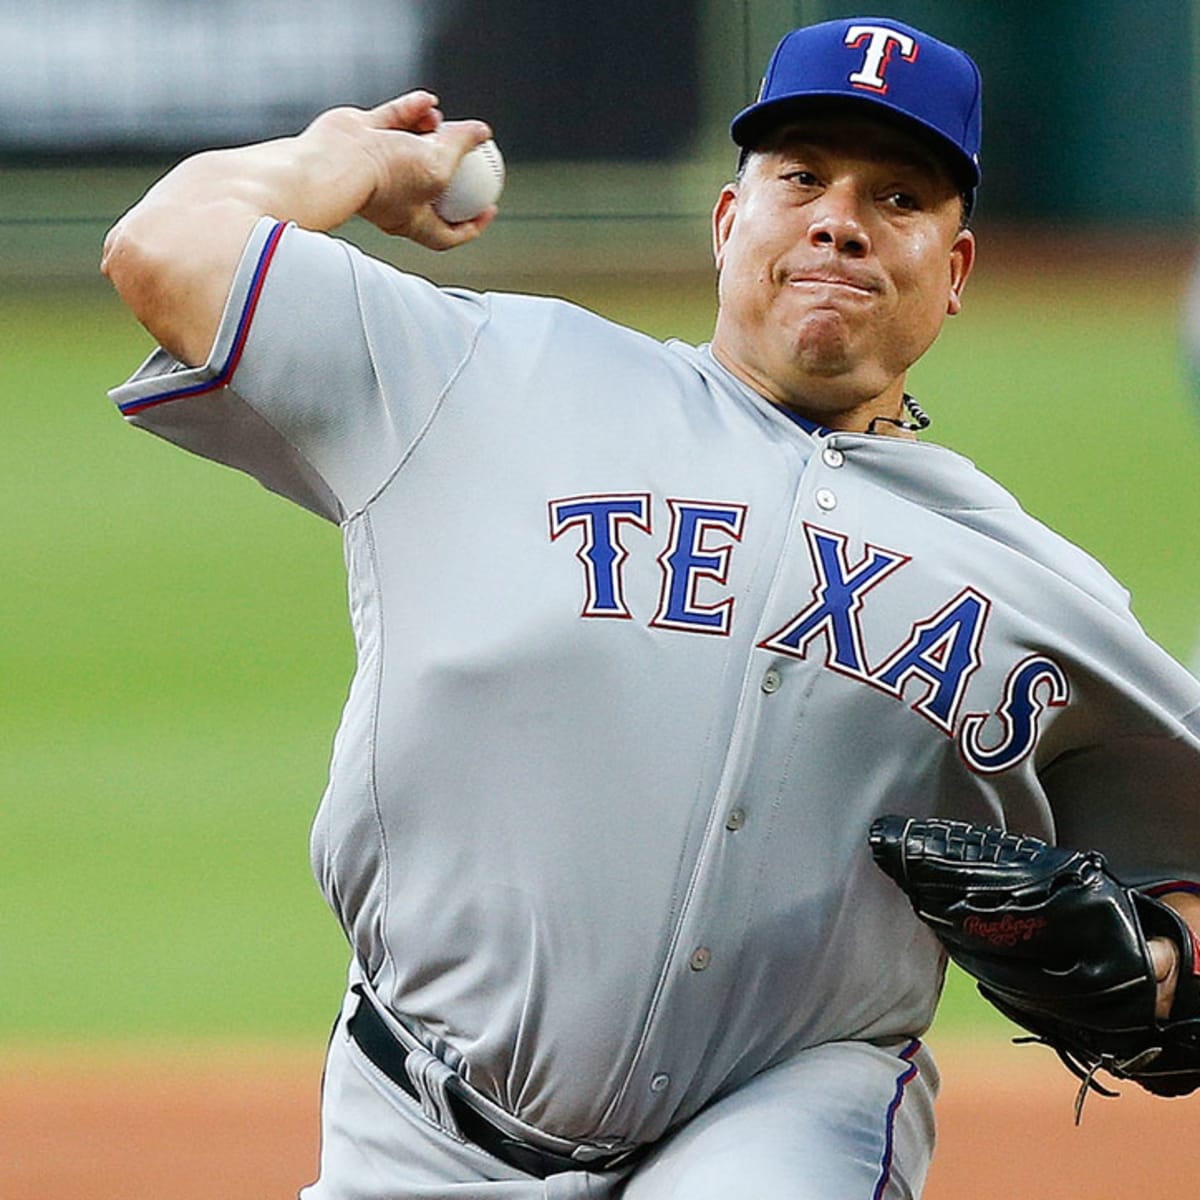 Bartolo Colon wants to make MLB return with Mets, or any team that